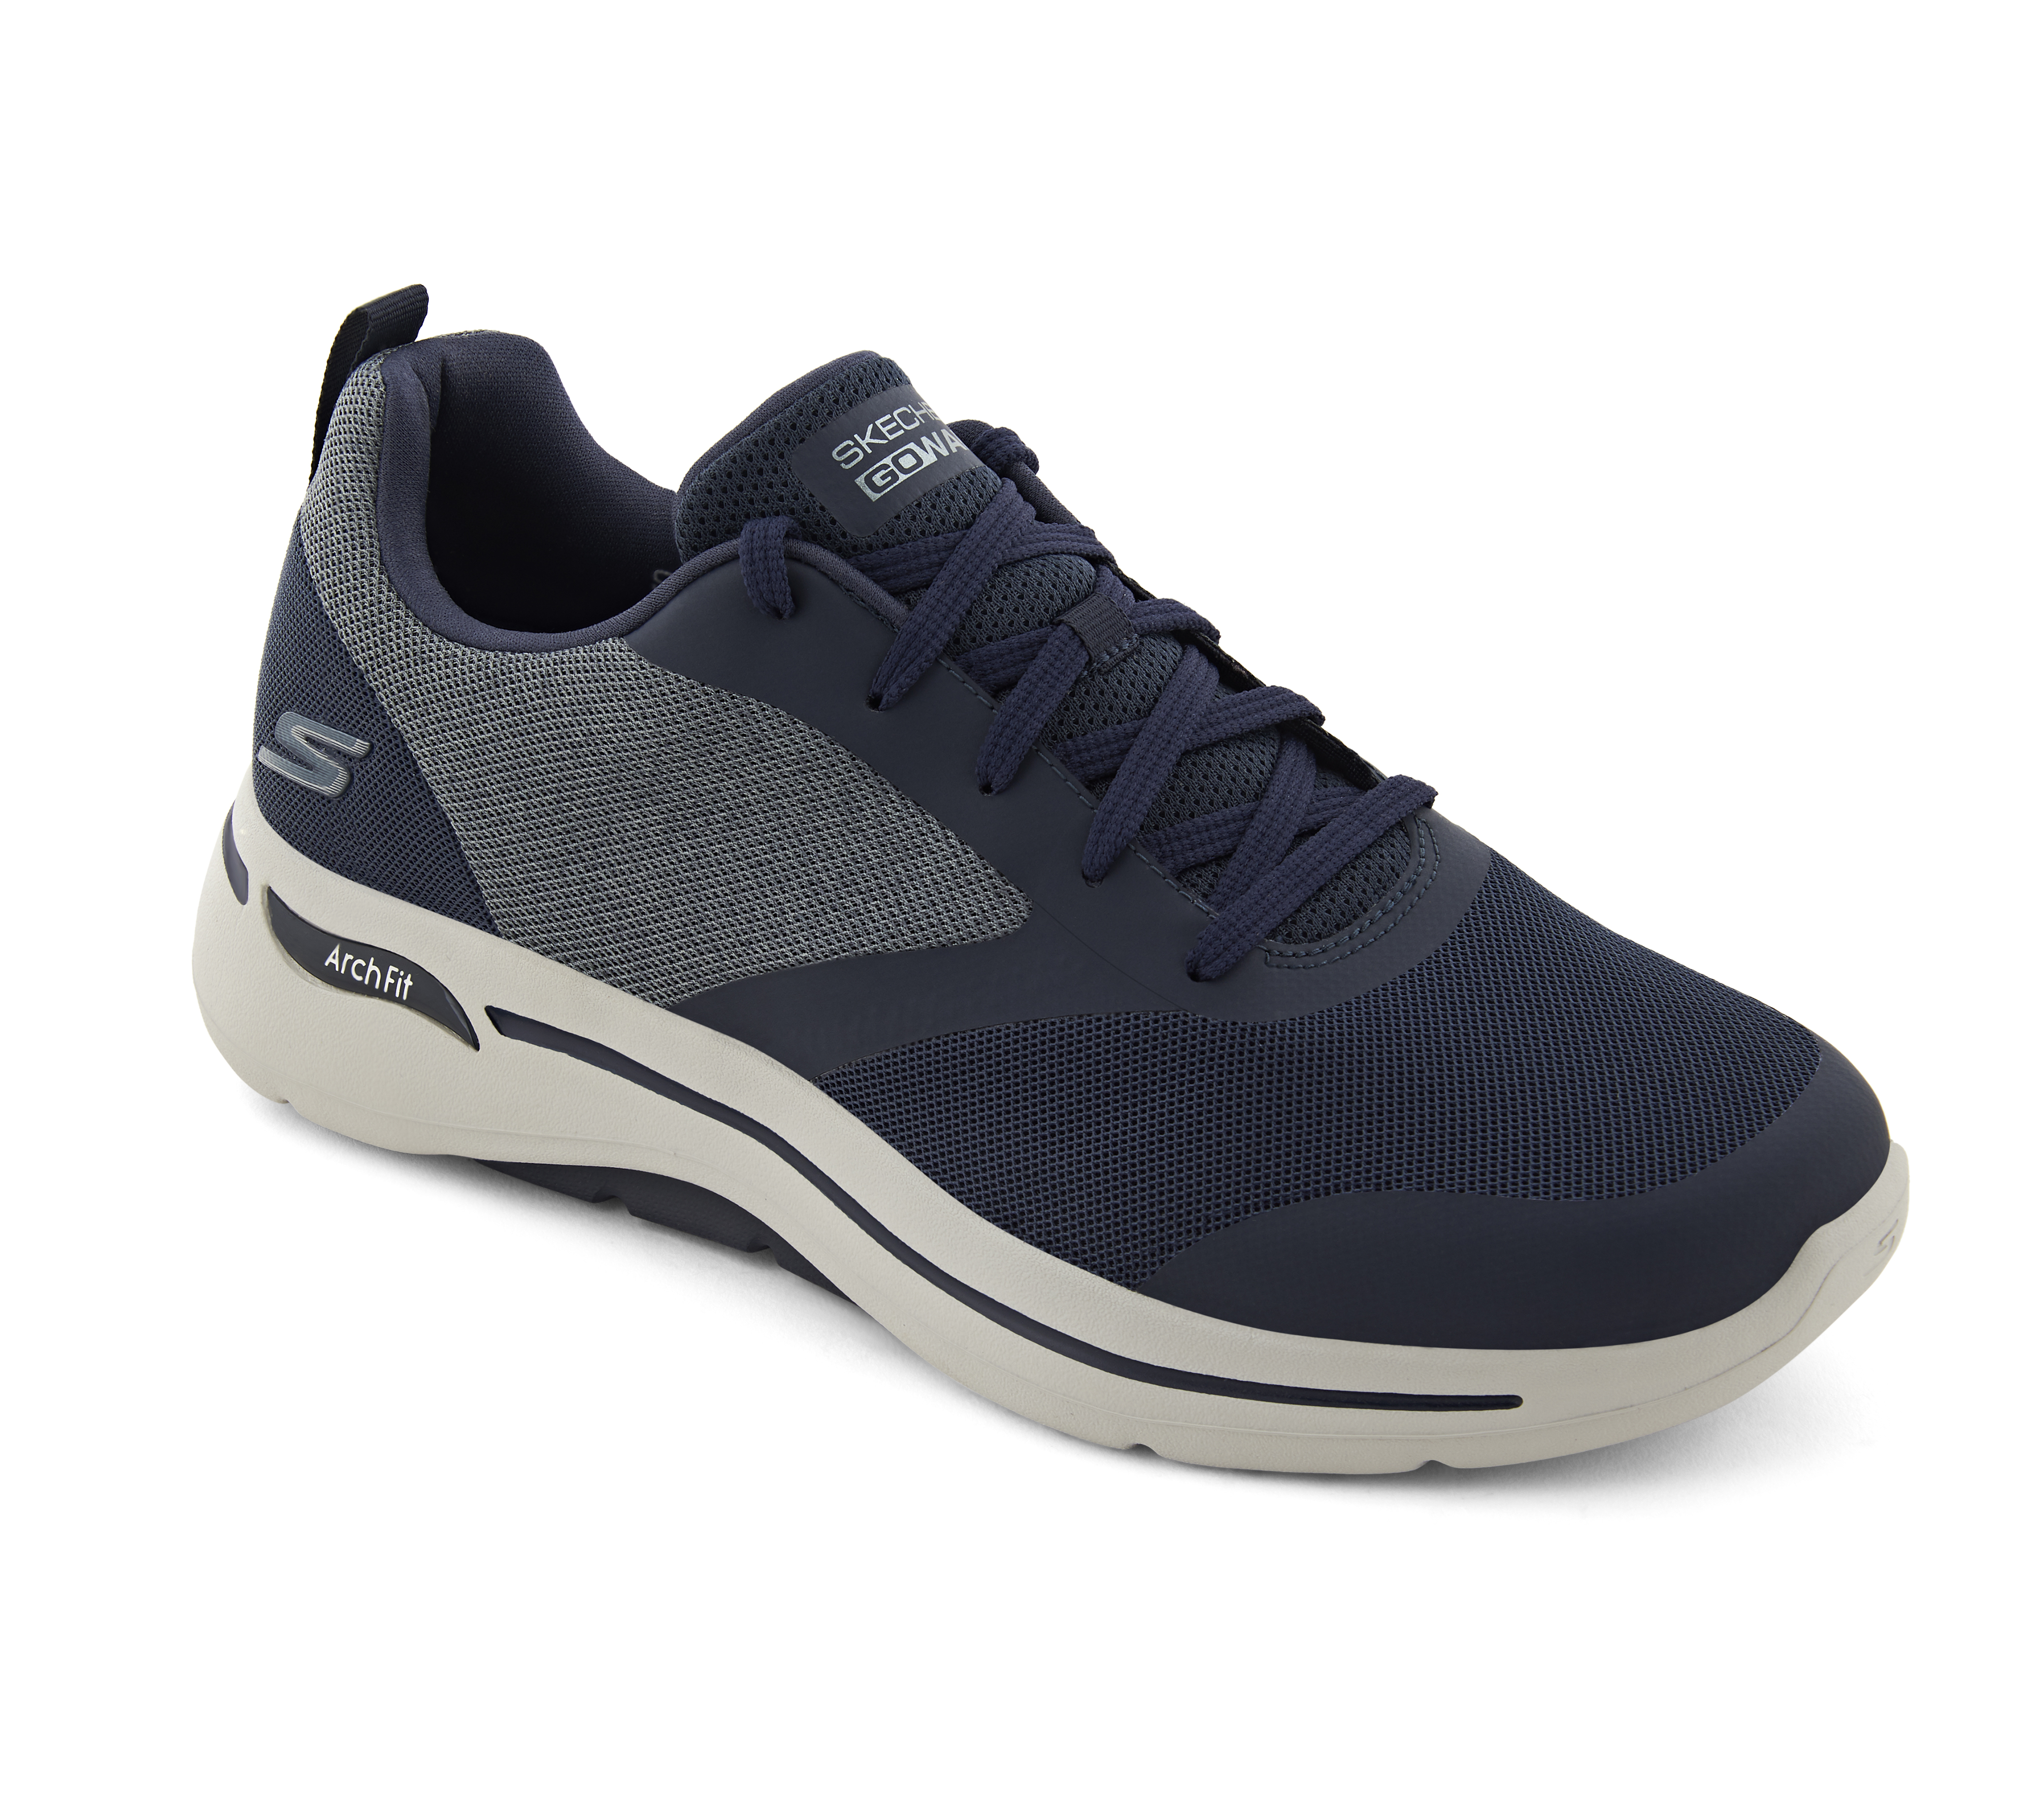 GO WALK ARCH FIT - SKY VAULT, NNNAVY Footwear Lateral View